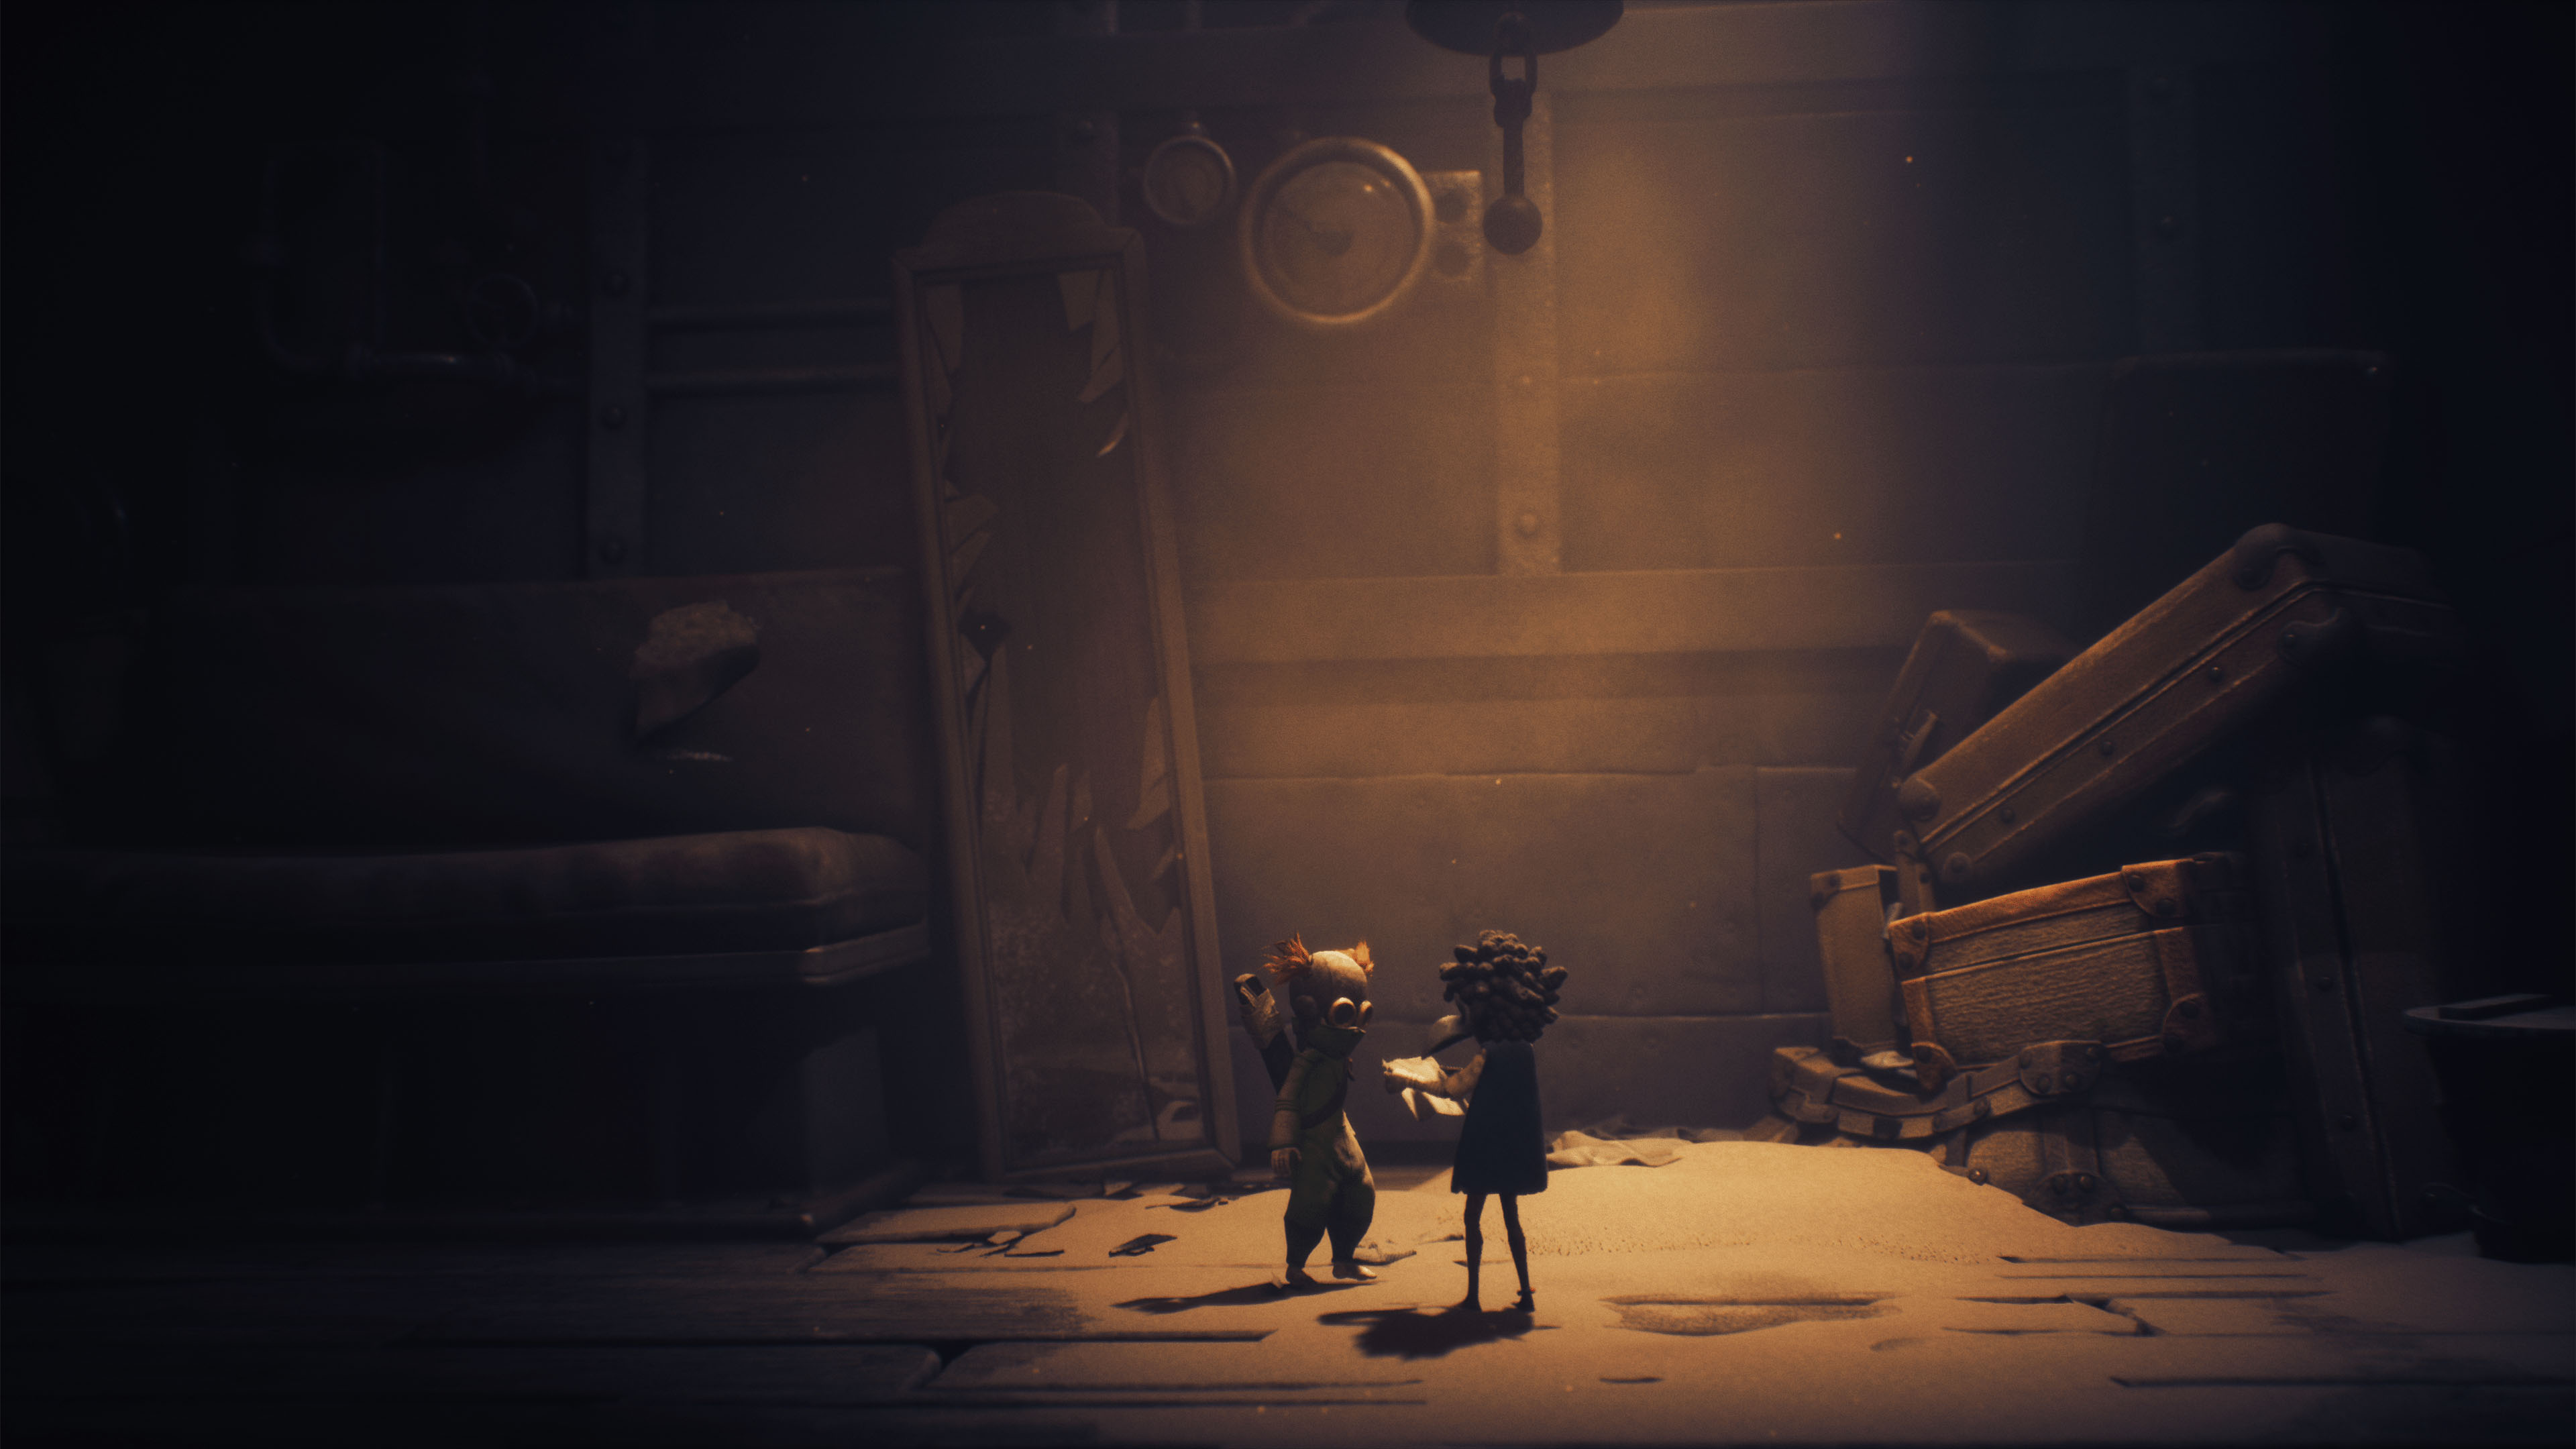 Little Nightmares 3  Official The Necropolis Co-op Gameplay - video  Dailymotion